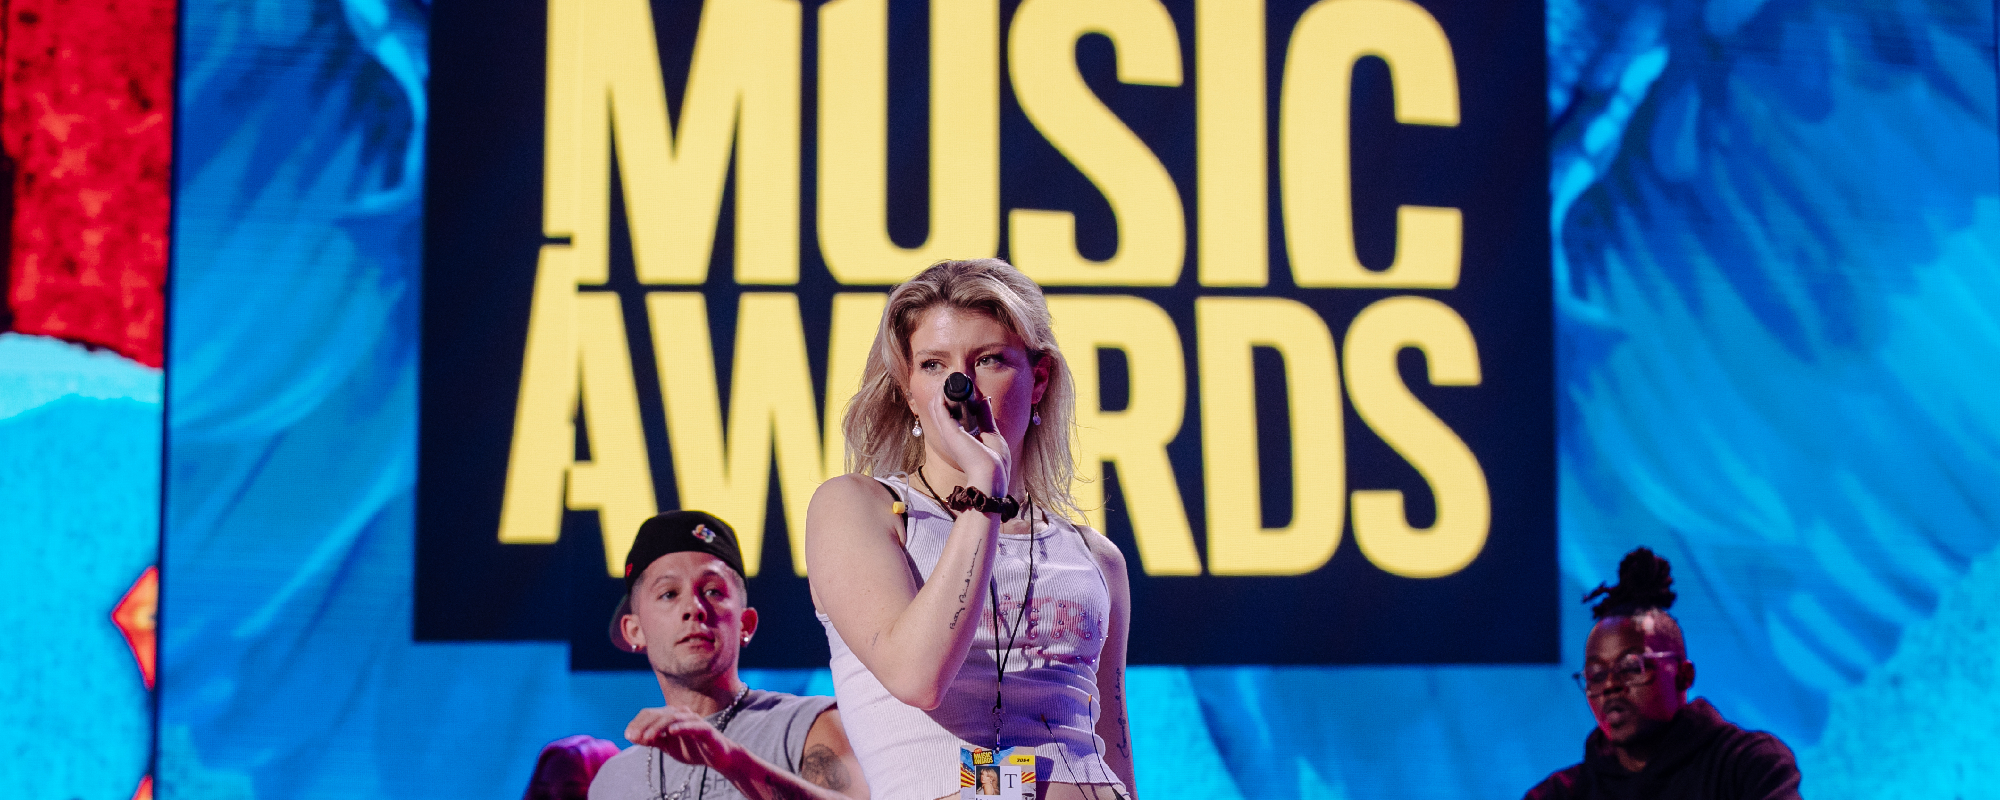 When, Where, and How To Watch the CMT Music Awards Tonight